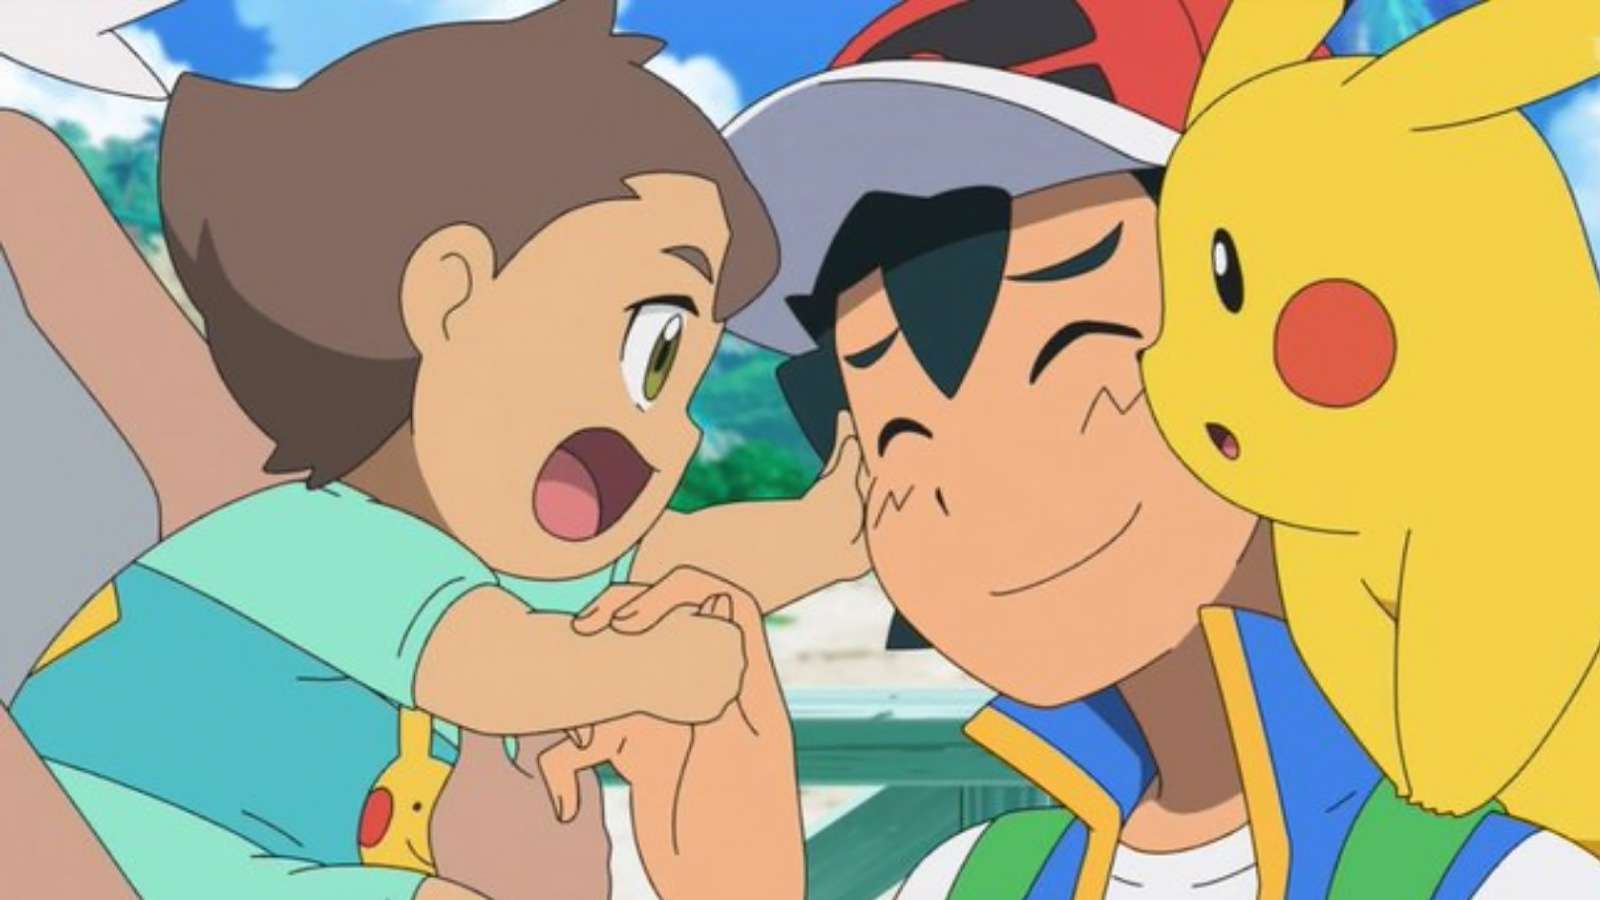 Screenshot of Ash Ketchum next to baby brother in Pokemon Journeys anime.